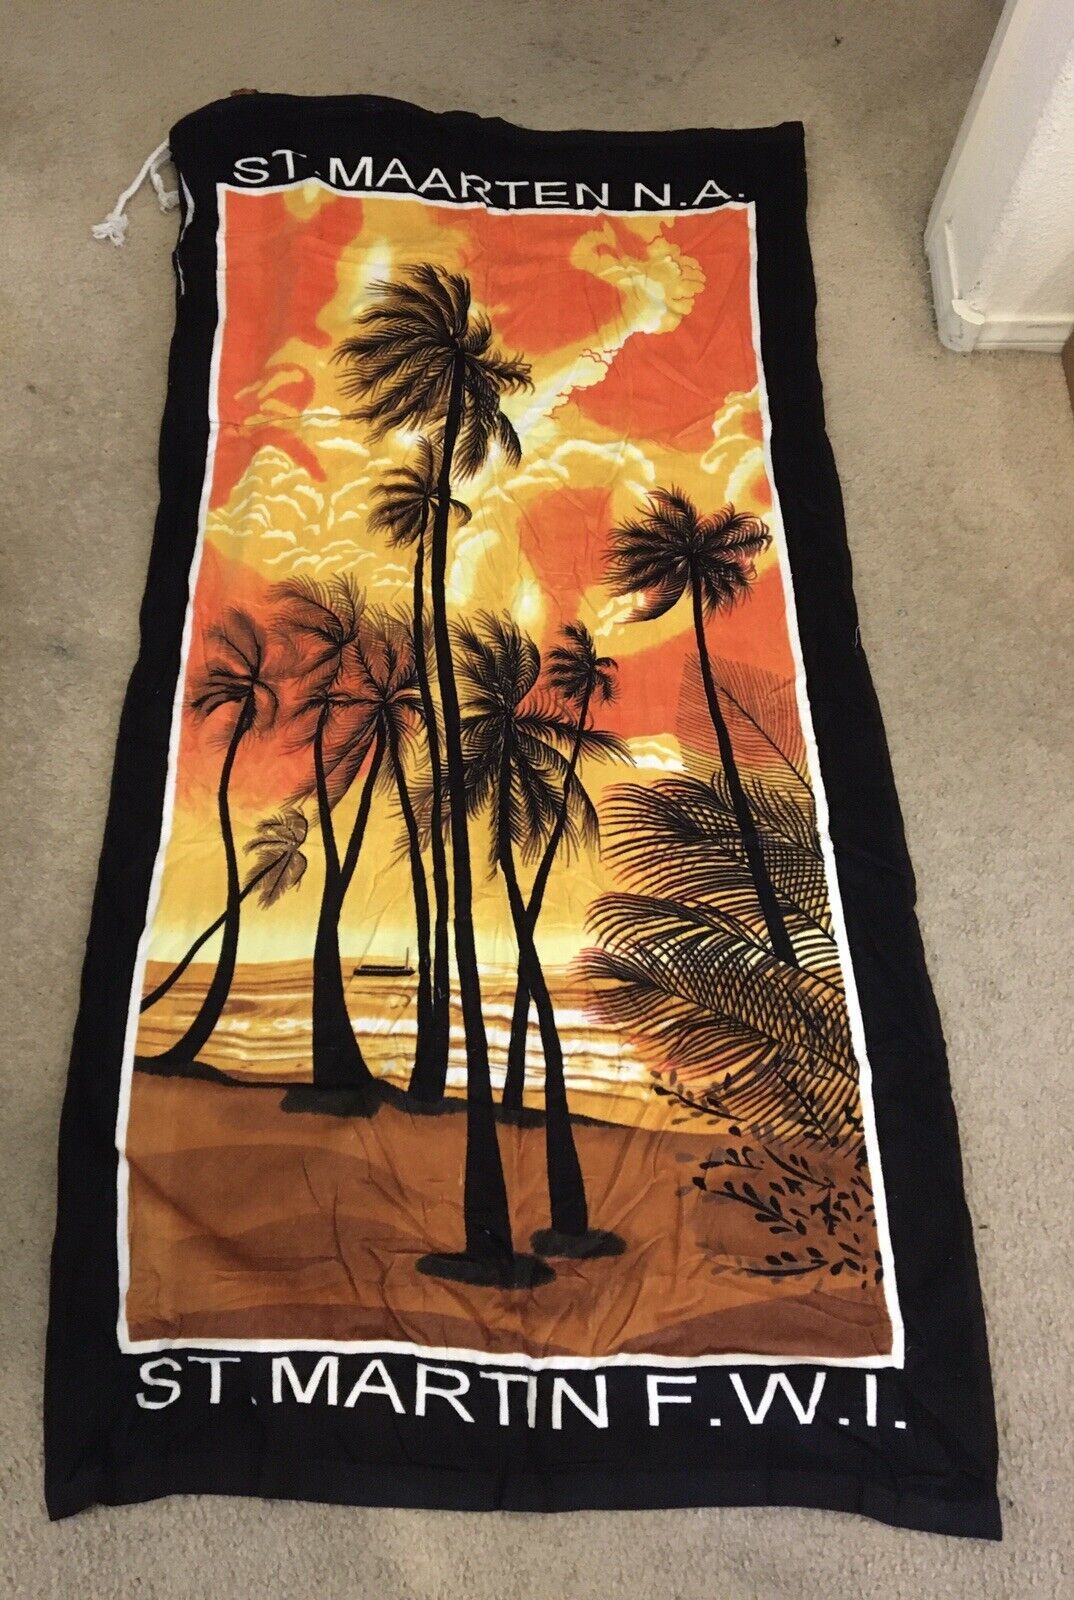 Towel ST. MARTIN F.W.I. St. Maarten N.A. TROPICAL PALM TREES Roll up Backpack - $38.00